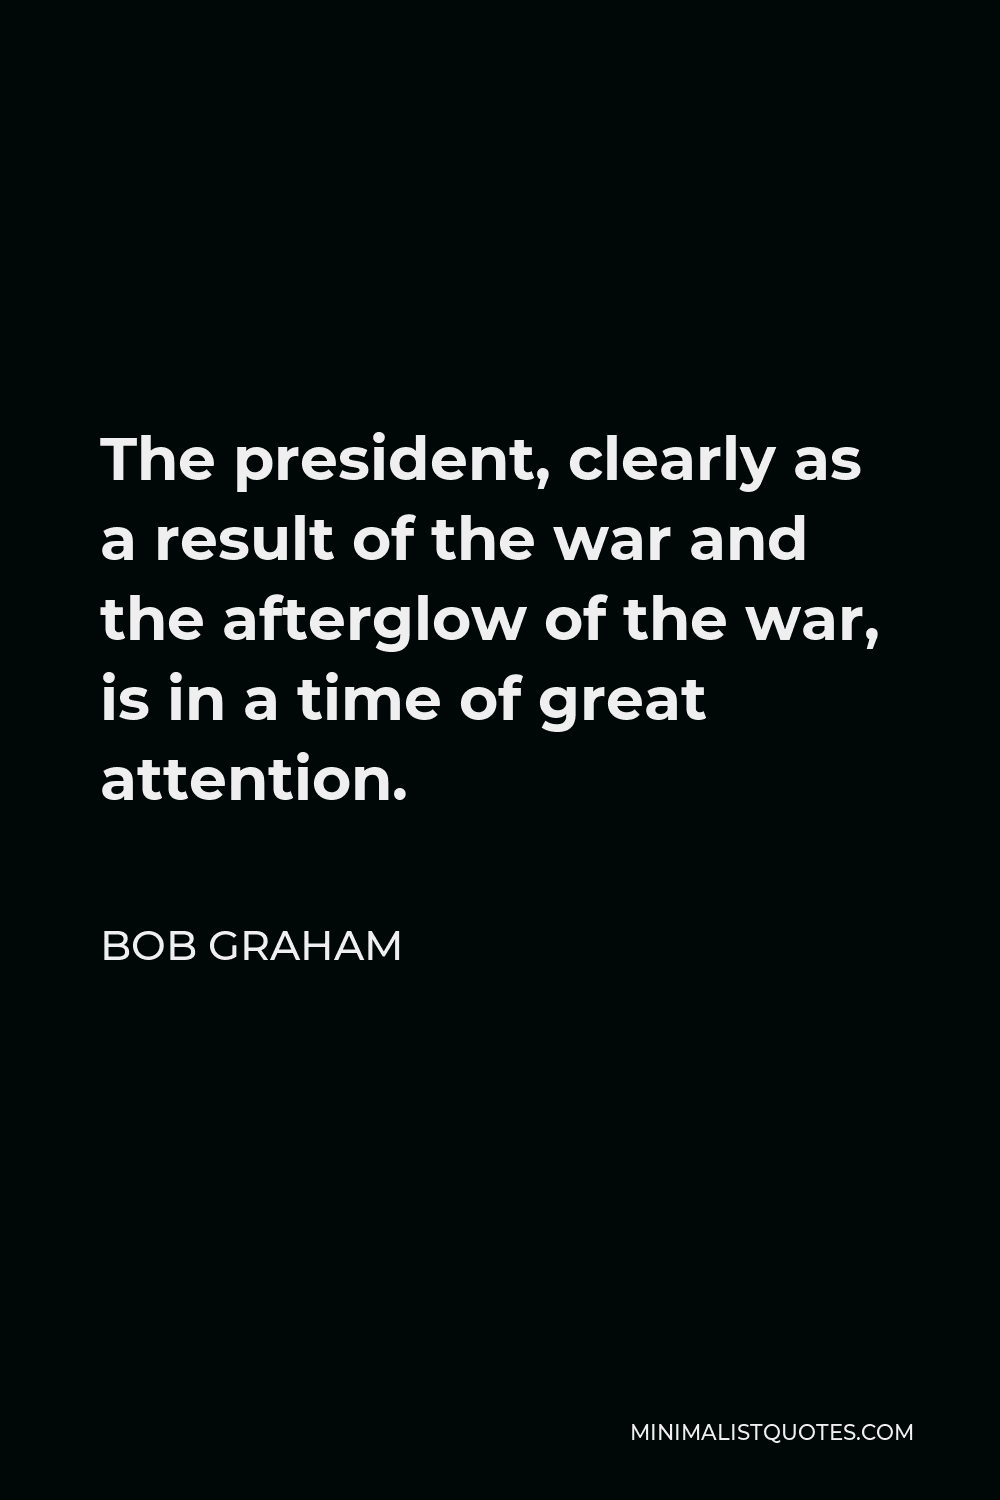 Bob Graham Quote - The president, clearly as a result of the war and the afterglow of the war, is in a time of great attention.